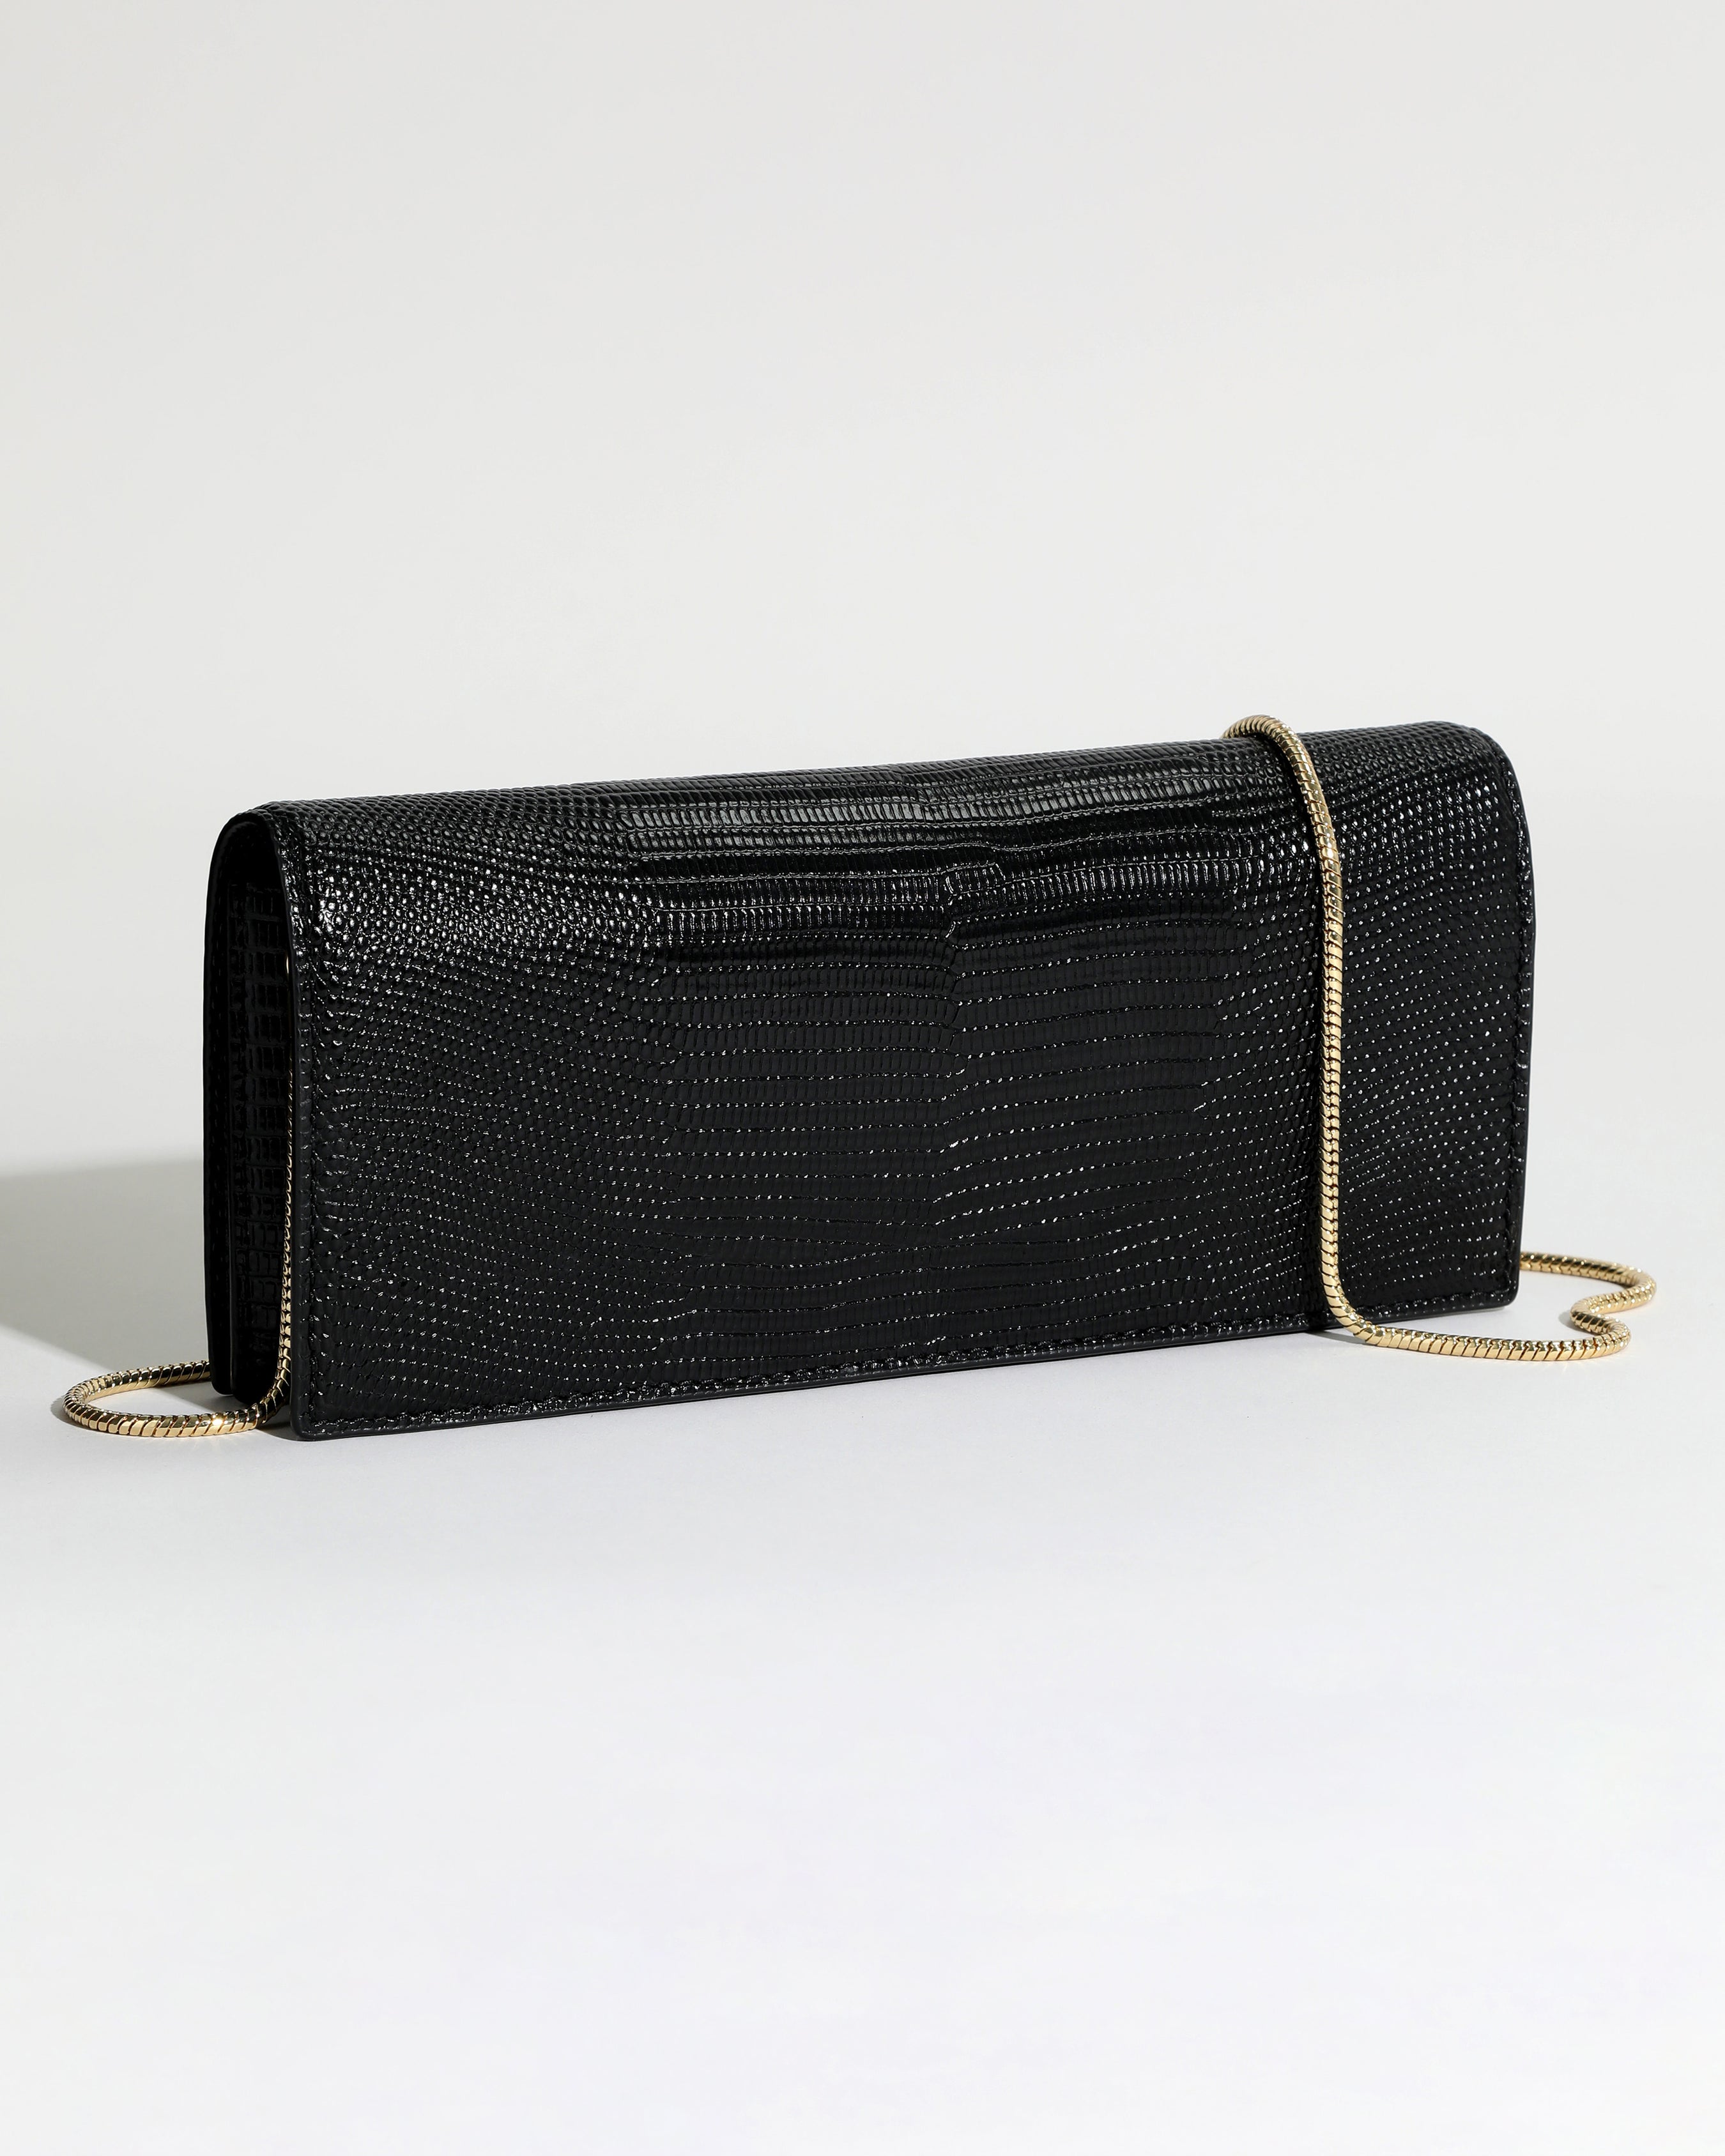 Twisted Gold Black Leather Clutch – ALEXIS BITTAR